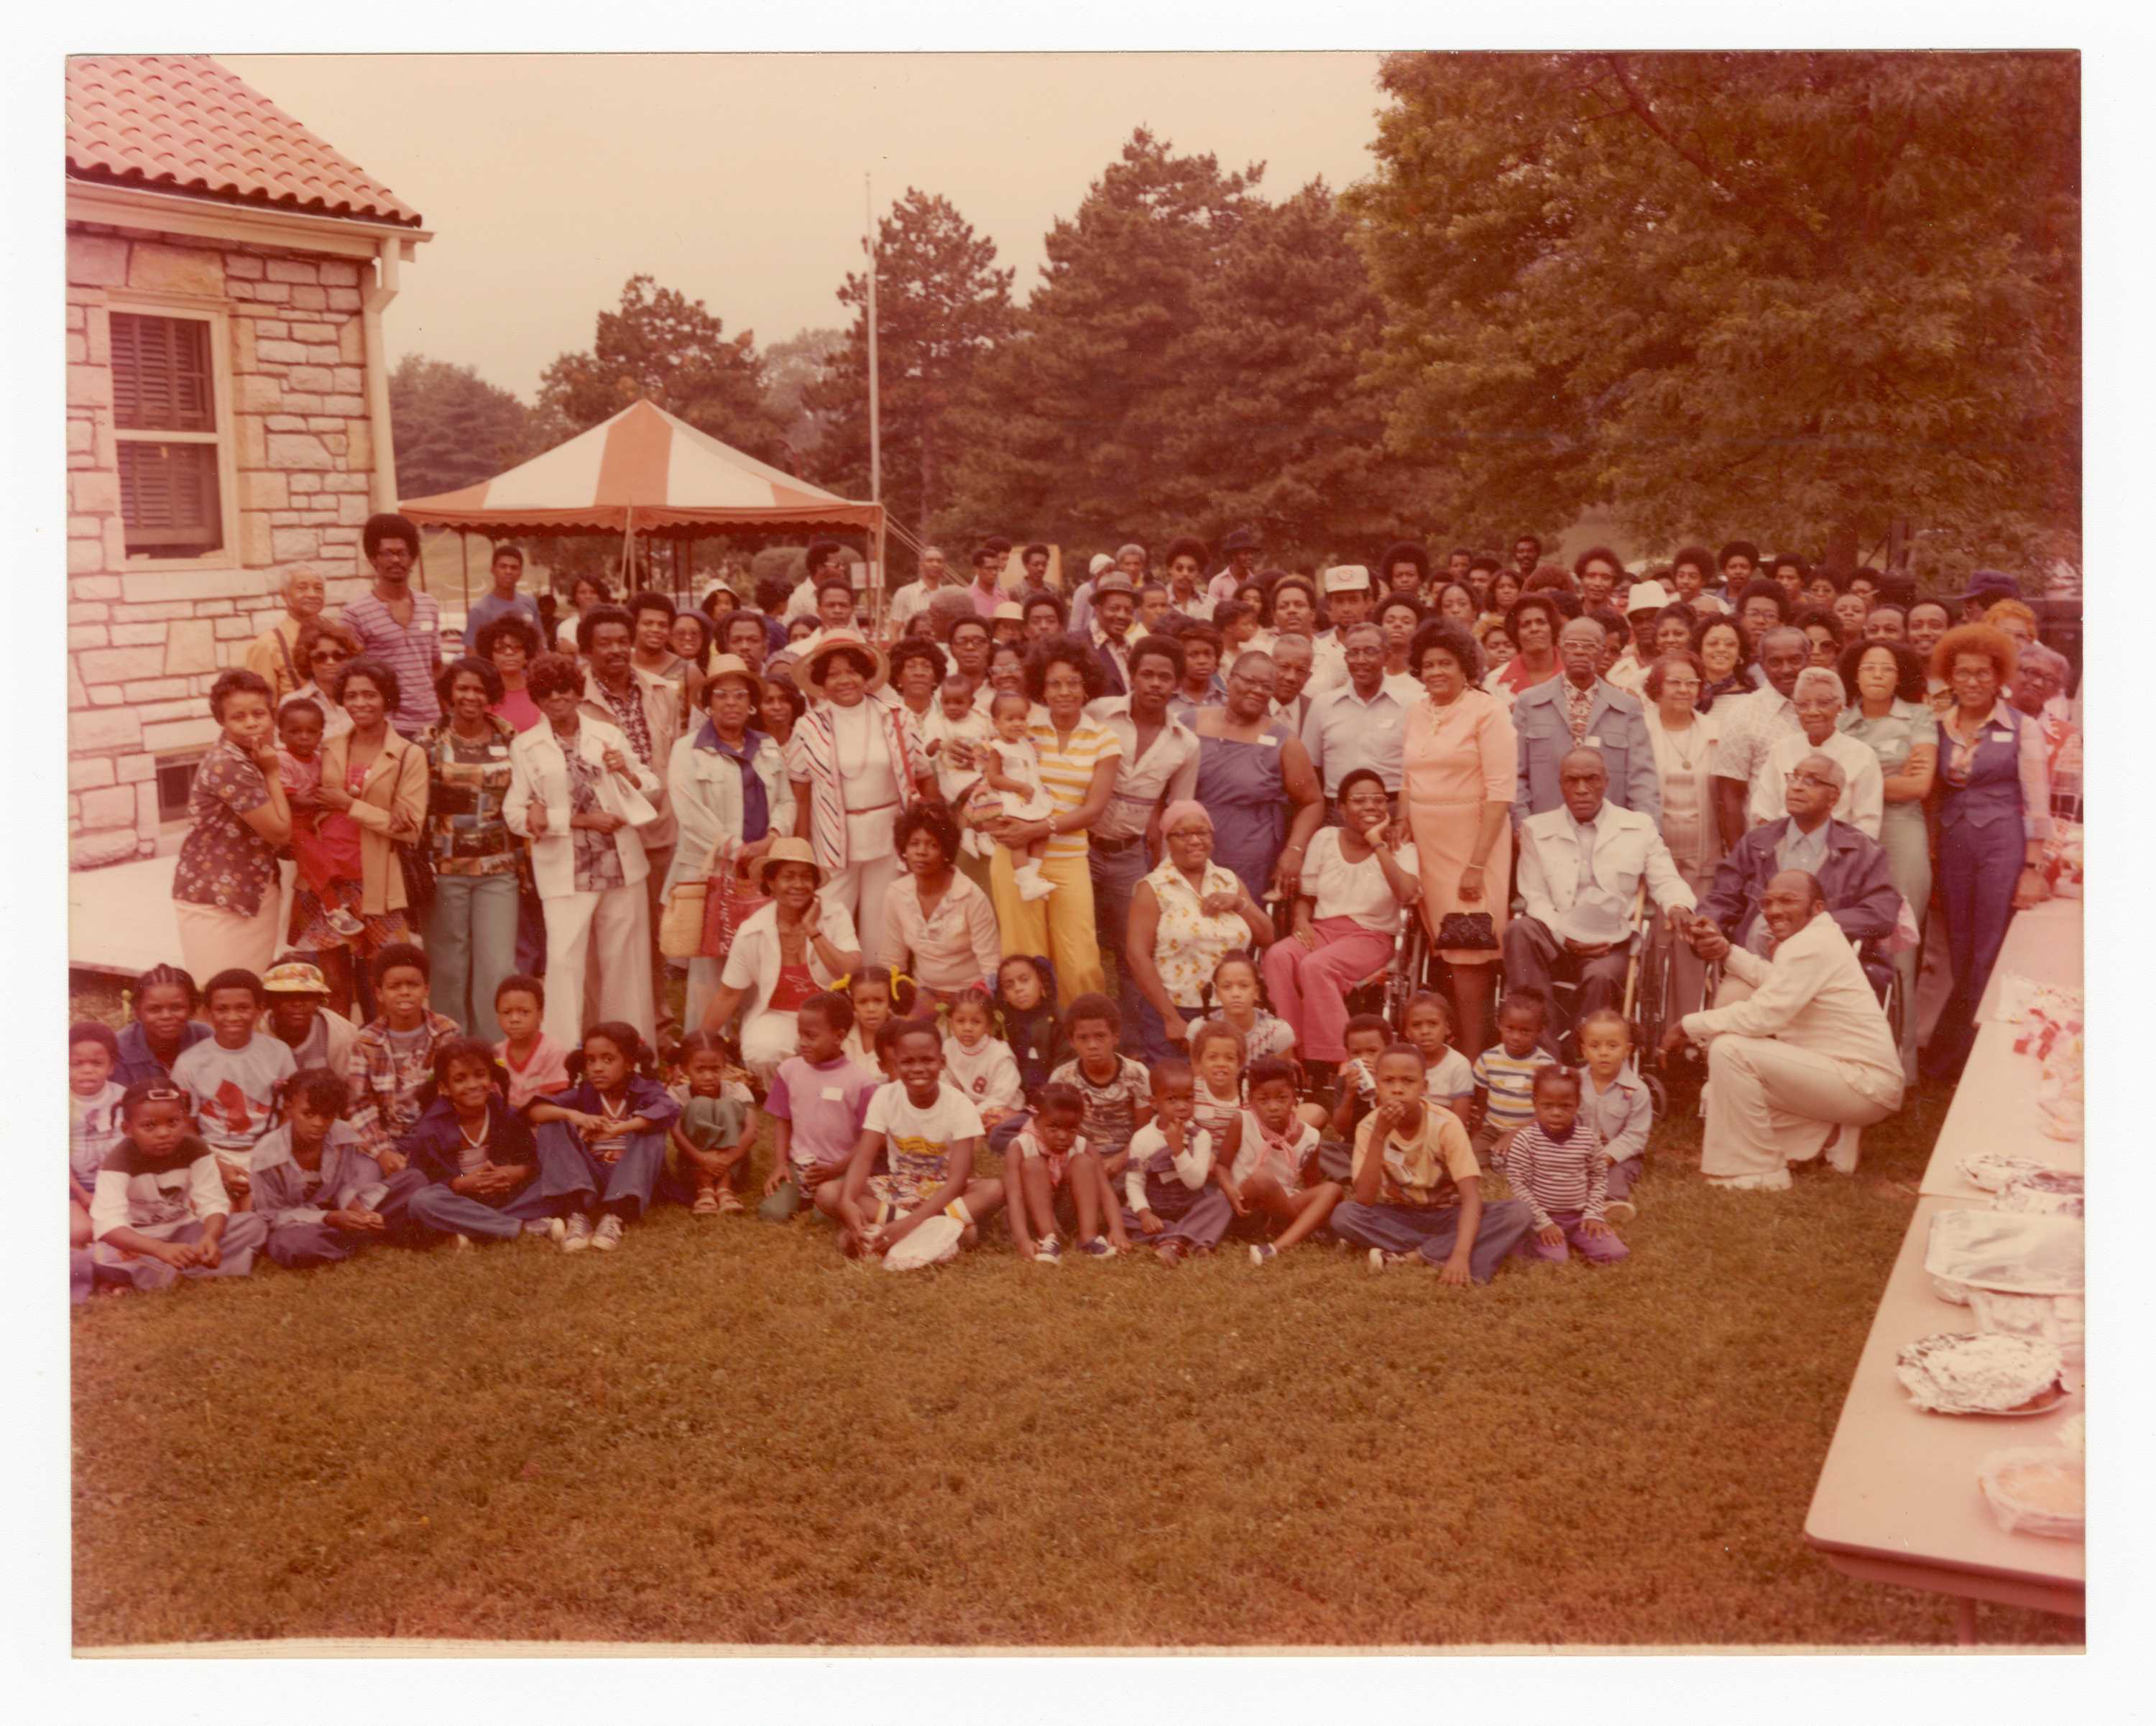 Color photograph of a large gathering of people outdoors. There are 7 rows of adults and 3 rows of children in front.